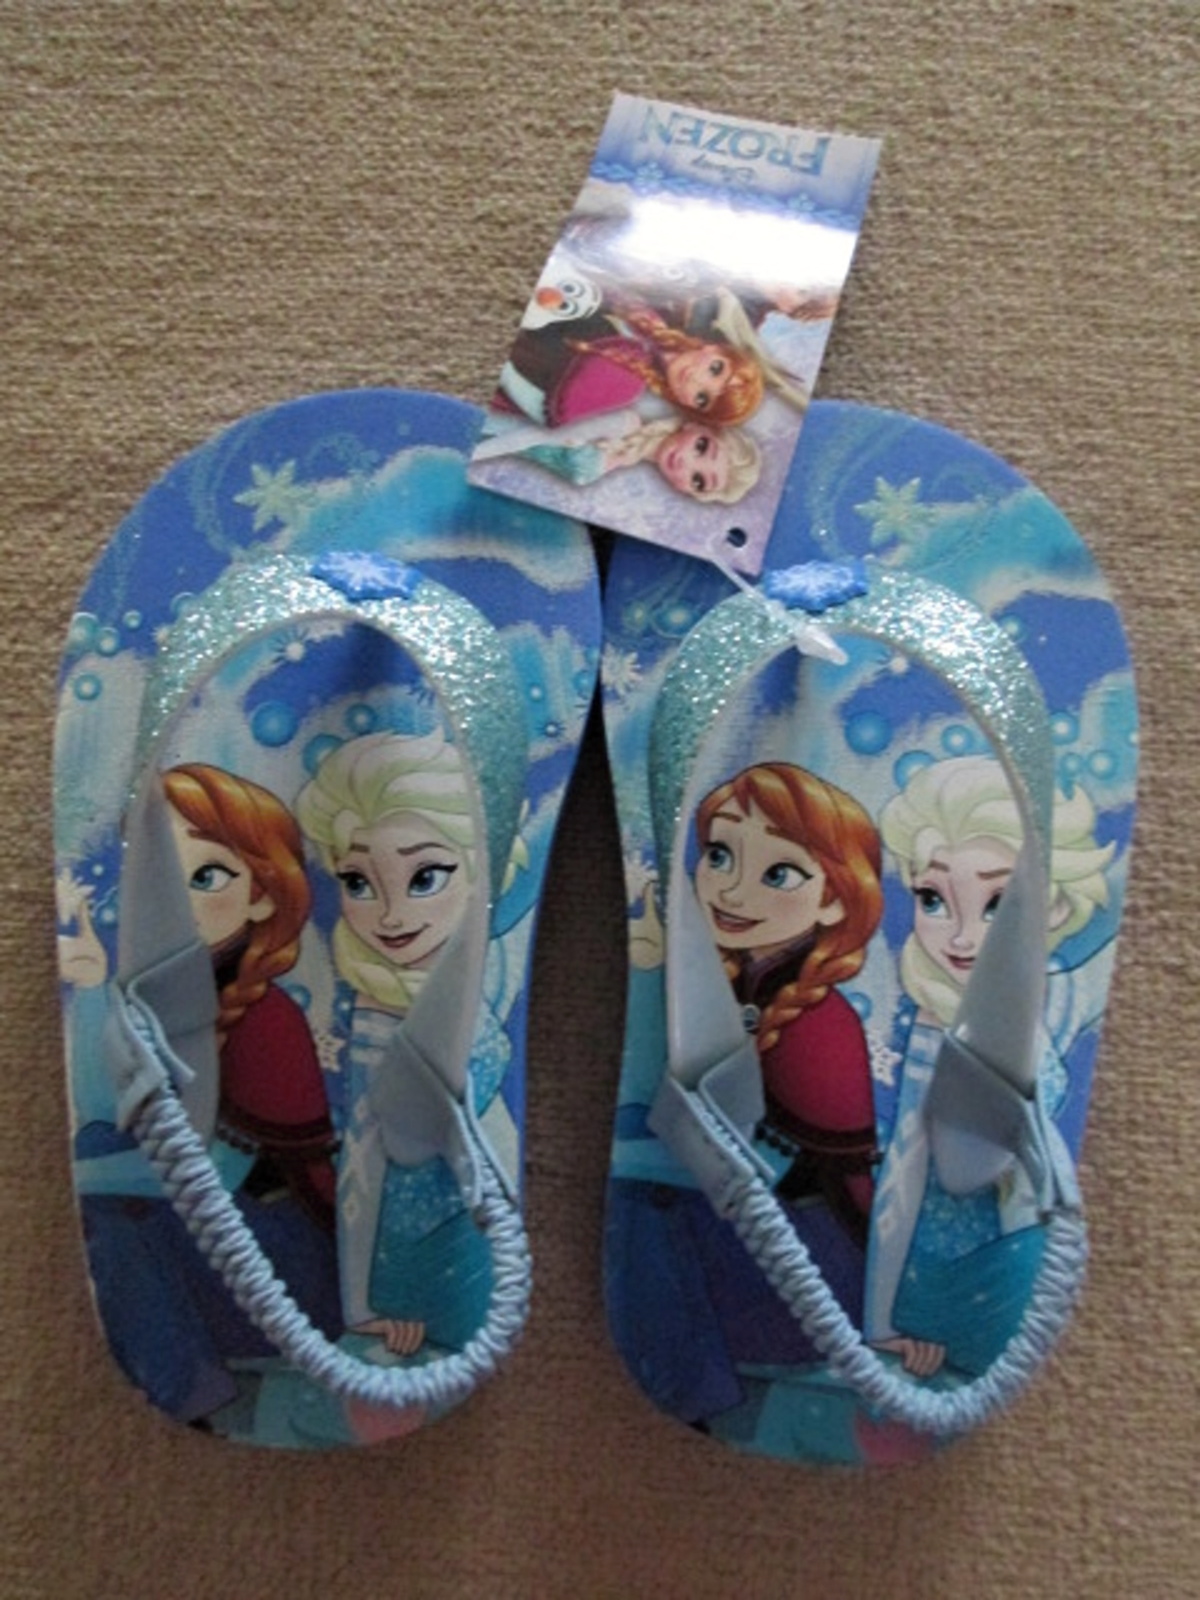 NWT Girls Frozen Thong Sandals W/Ankle Strap Size Small 5/6  - $10.95